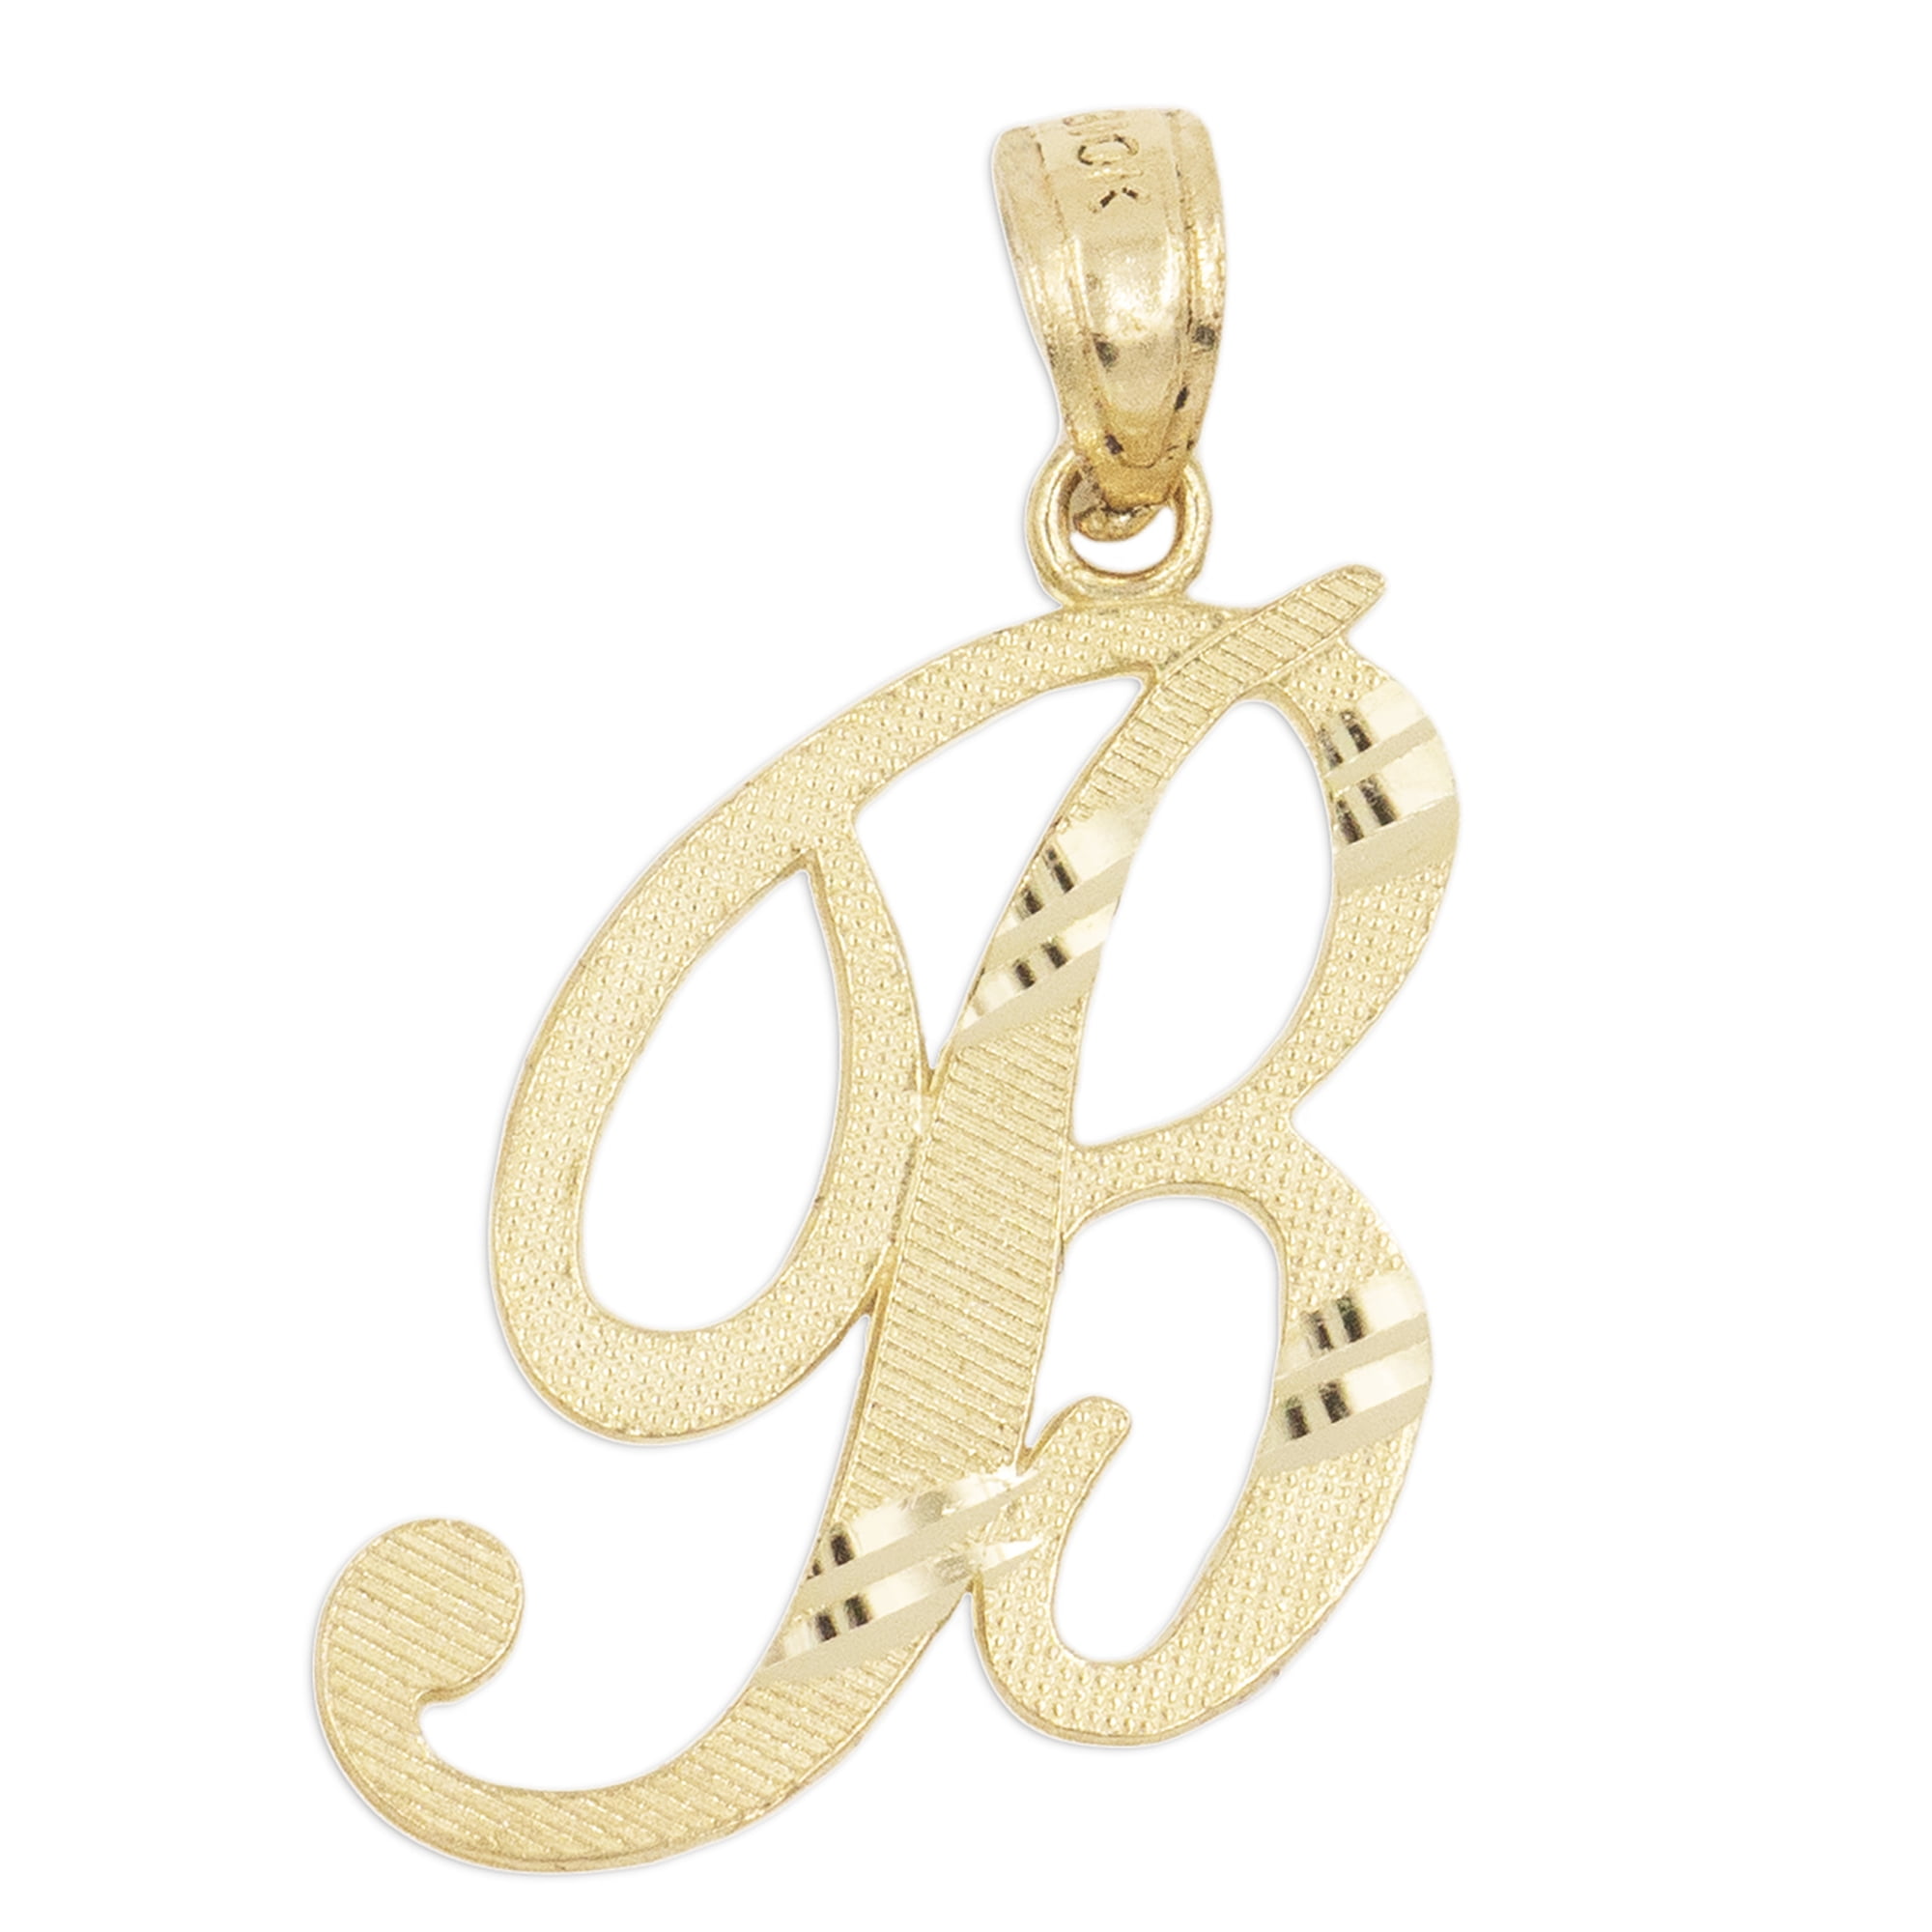 English Alpahbet A-Z Letter Charm with Diamond Cut Ice on Fire Jewelry 10k Solid Real Gold Cursive Initial Pendant